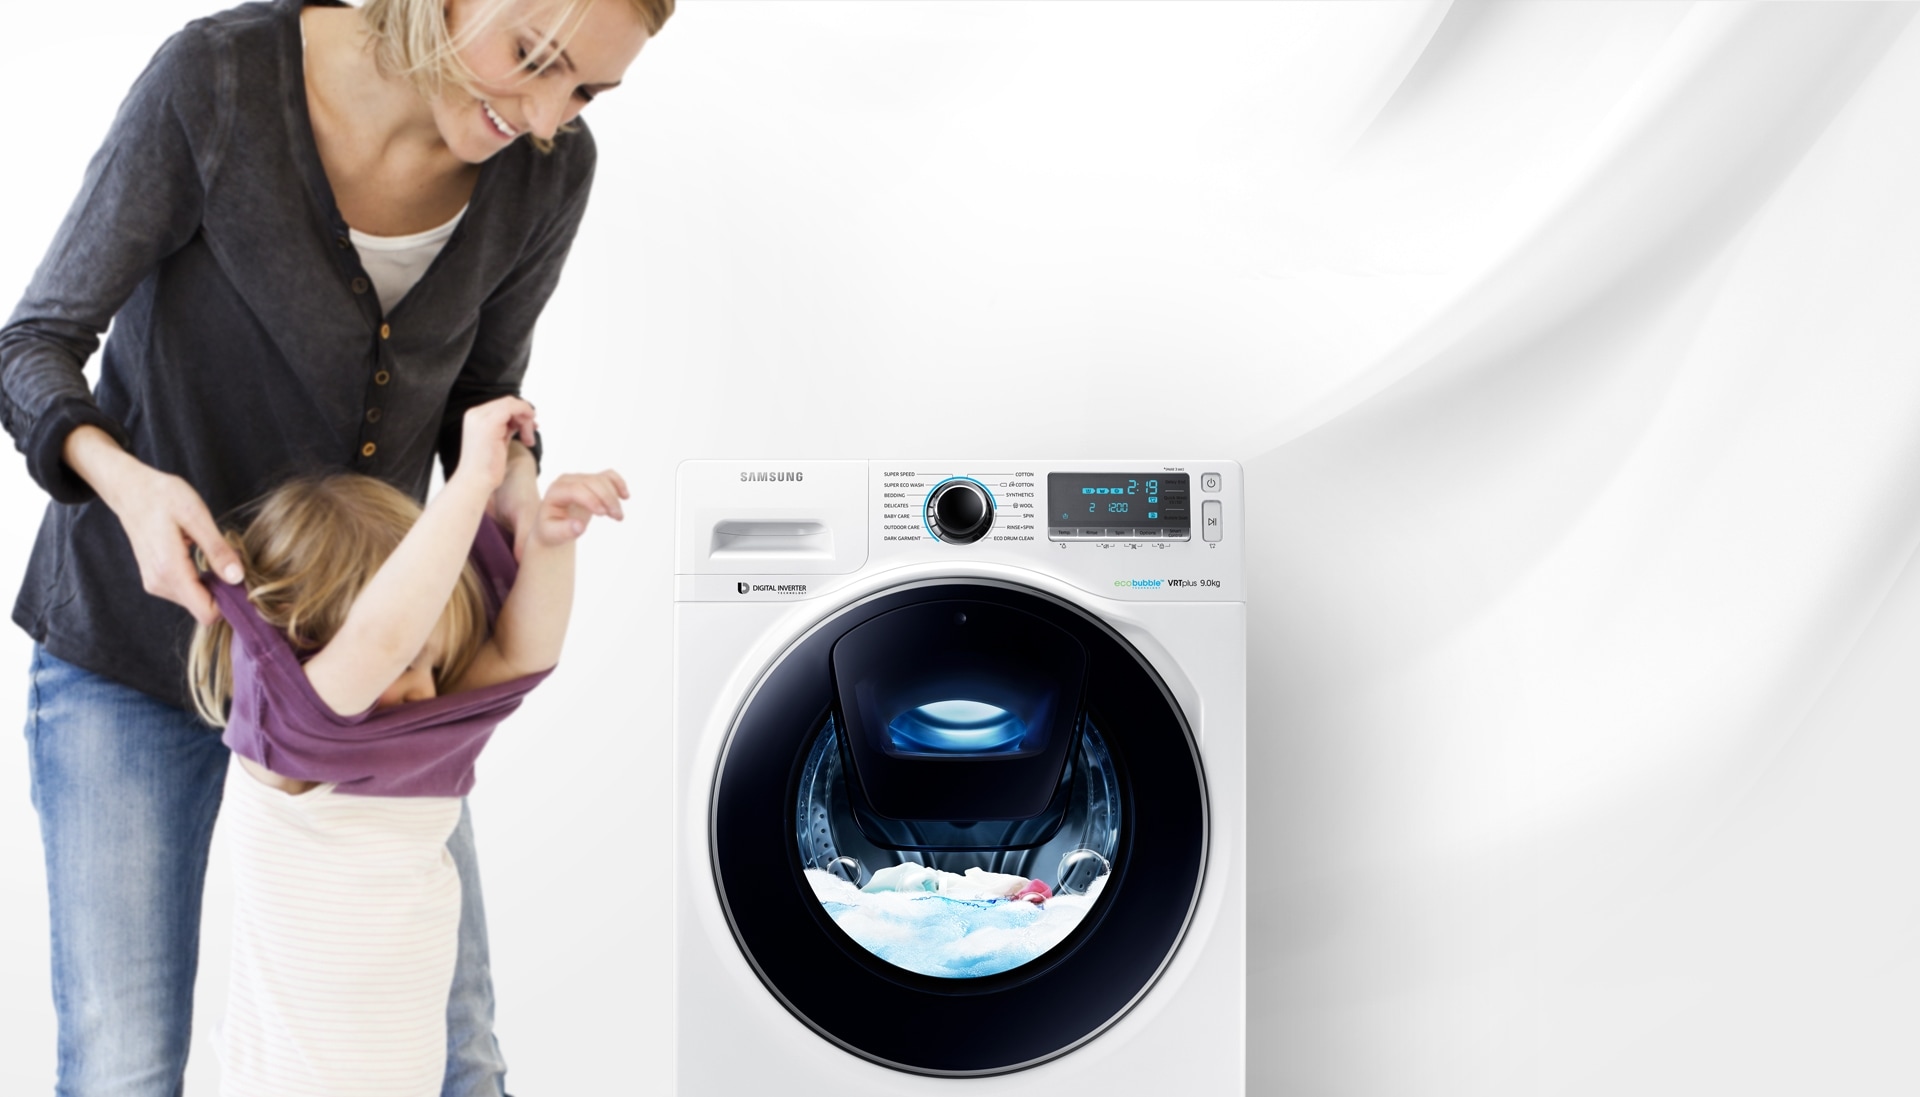  An image of a woman taking off her child's clothes next to a WW6500 washing machine which is in the middle of a cycle.